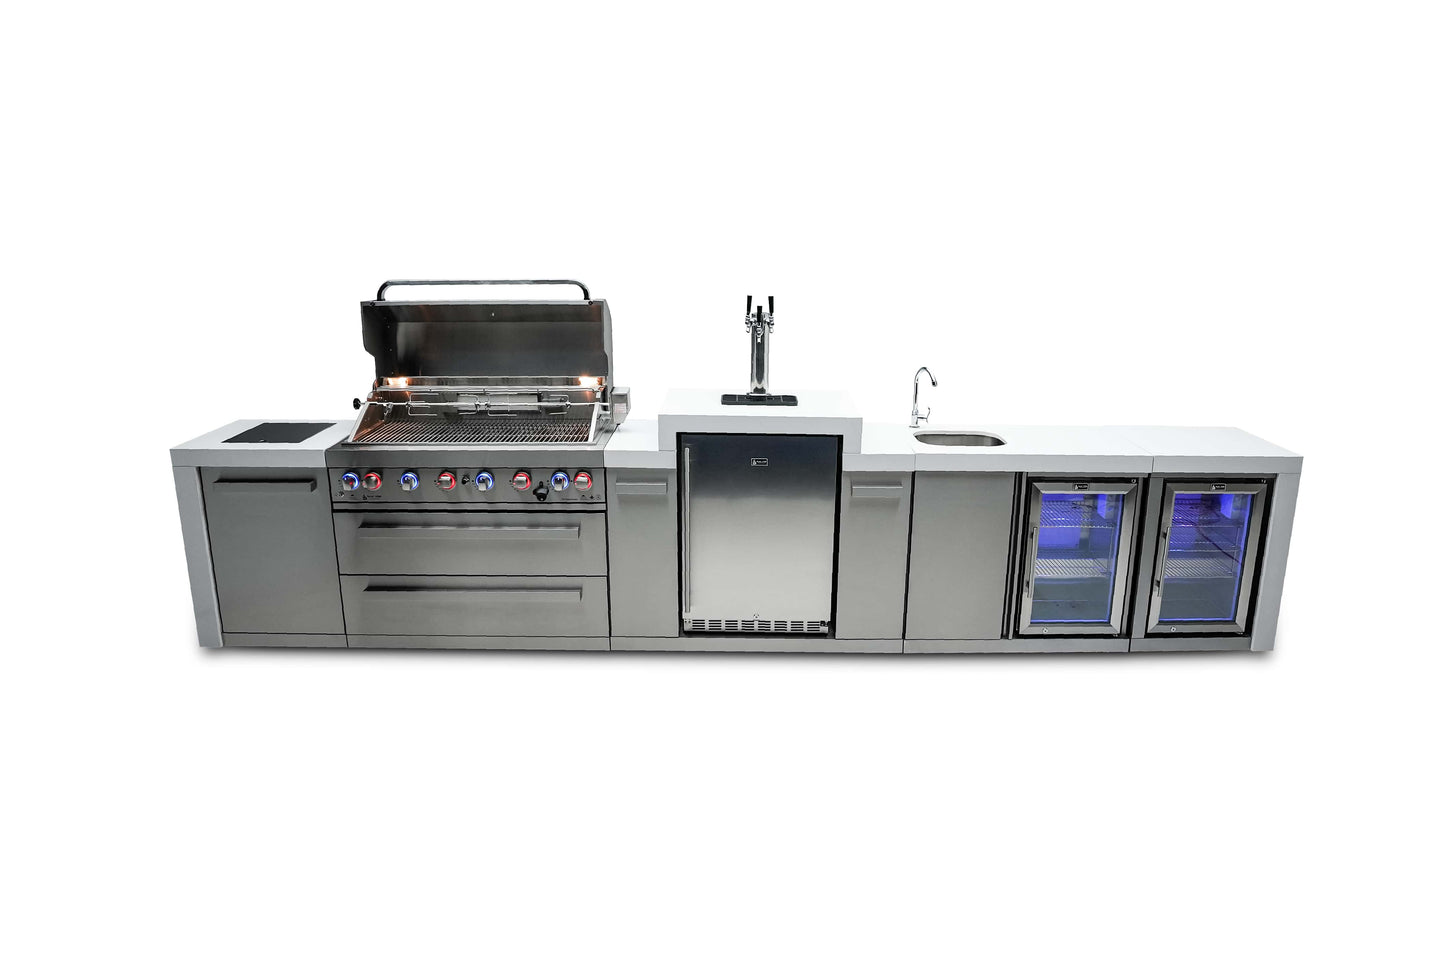 Mont Alpi Deluxe Island Grill 805